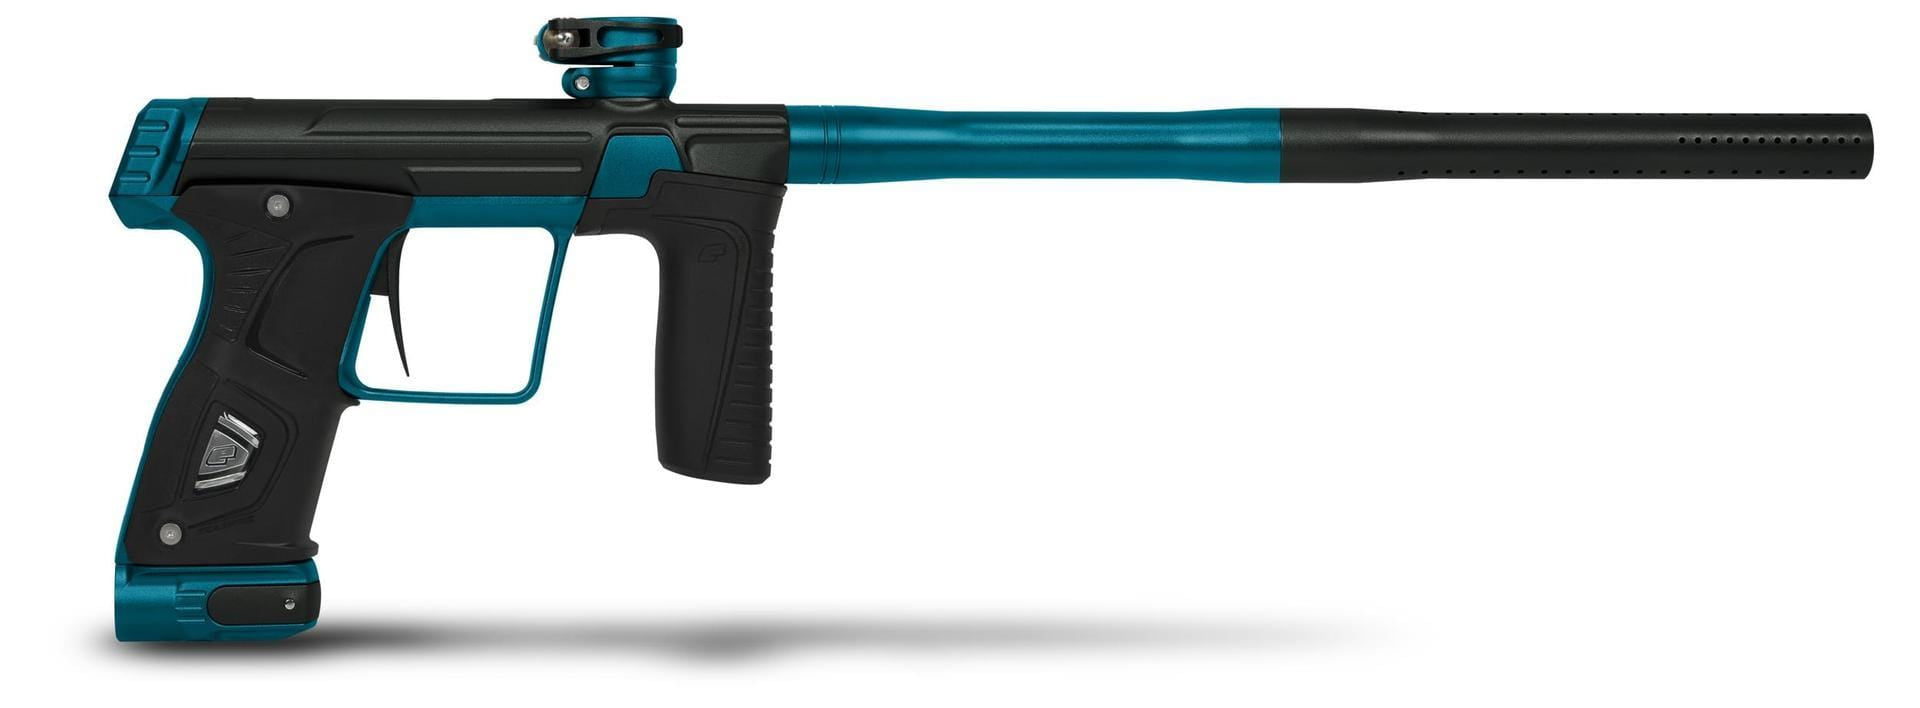  BLUE - Eminent Paintball And Airsoft